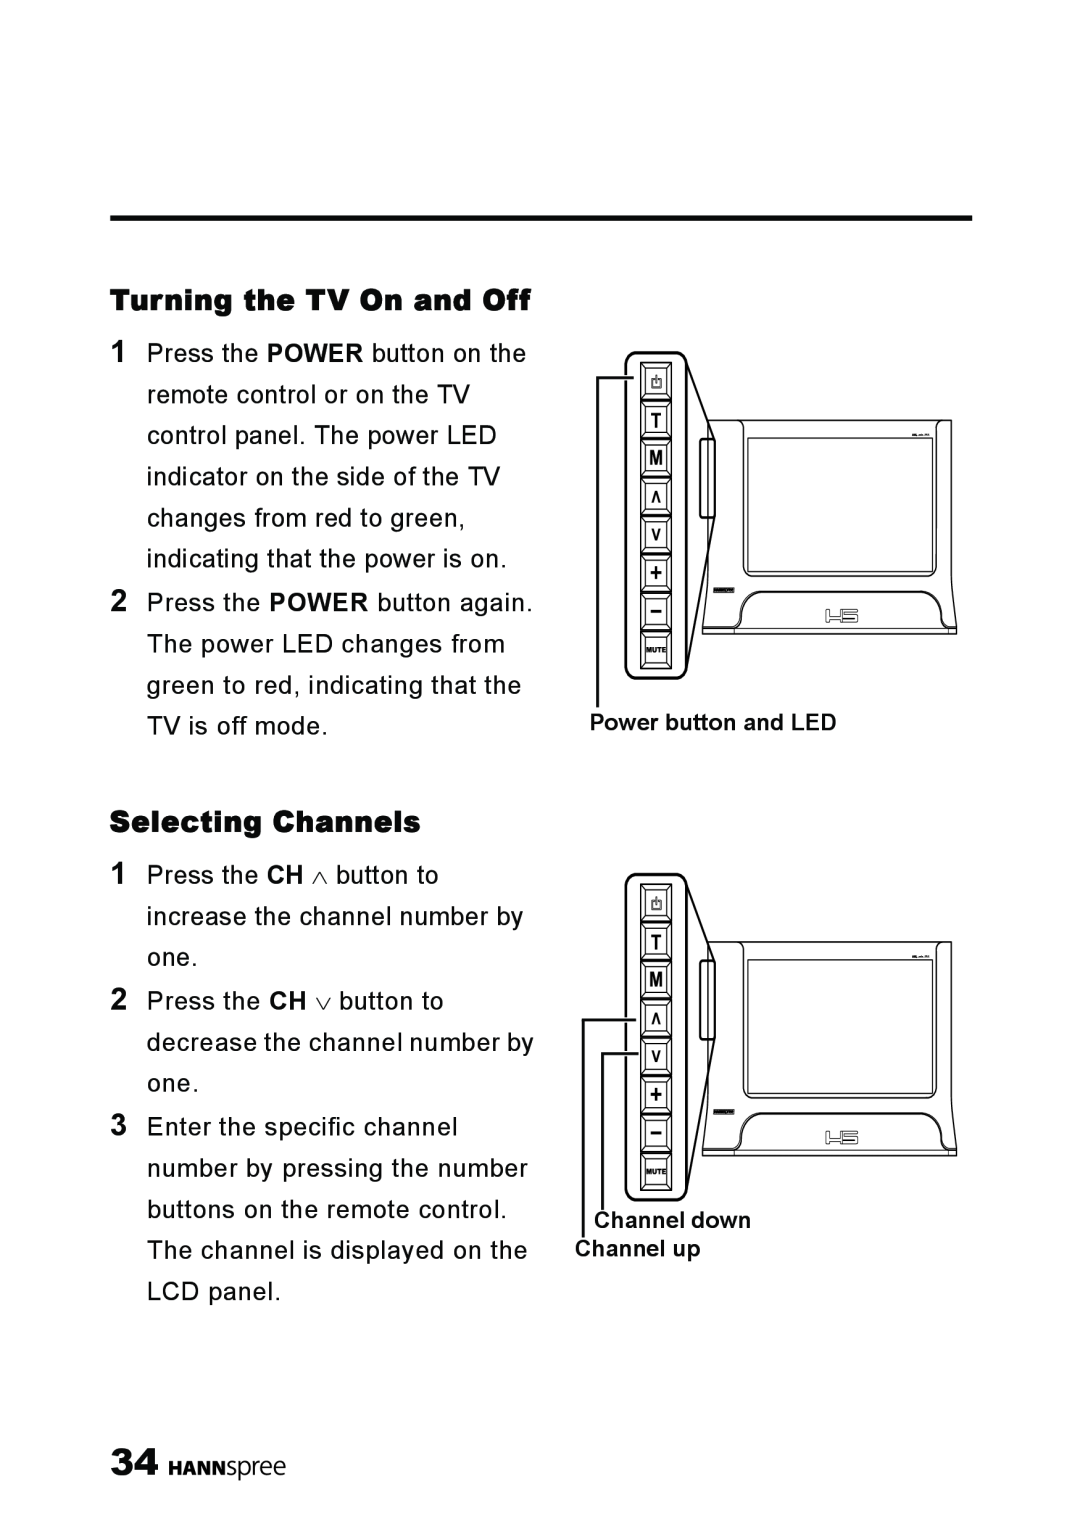 HANNspree LT11-23A1 user manual Turning the TV On and Off, Selecting Channels, TV is off mode 